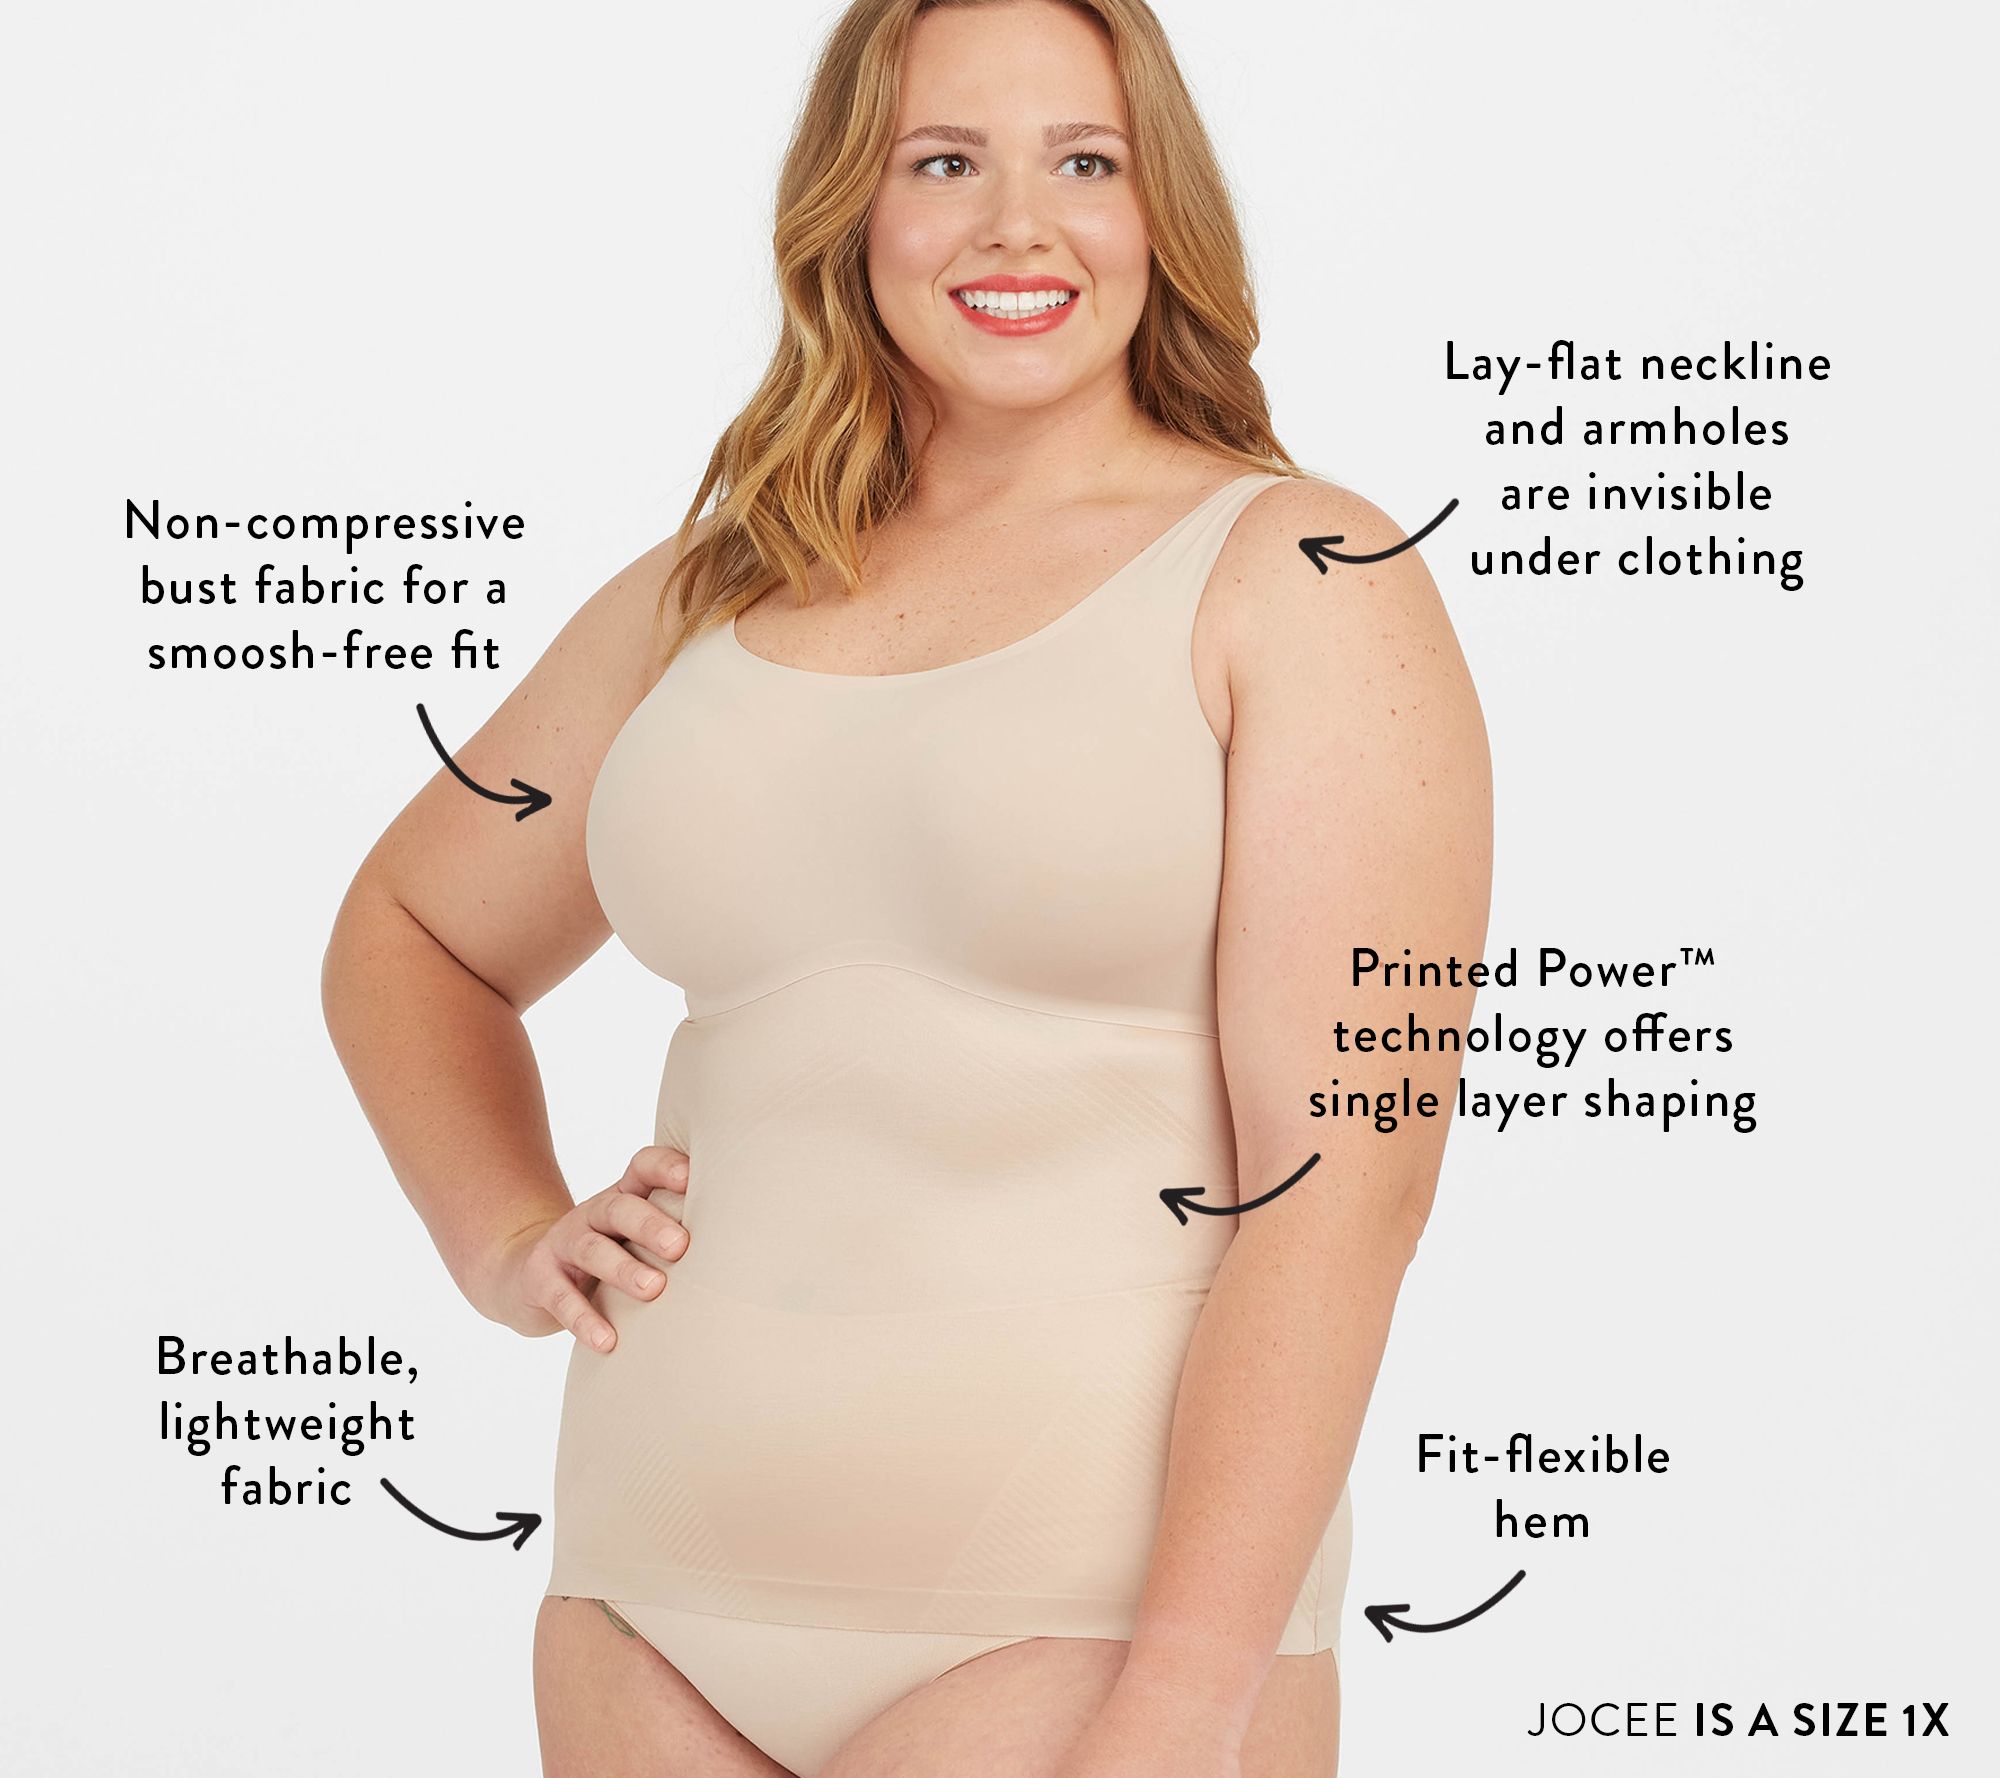 SPANX Shapewear for Women Sculpting, Open Bust Full Slip (Regular and Plus  Sizes) Foundation MD One Size